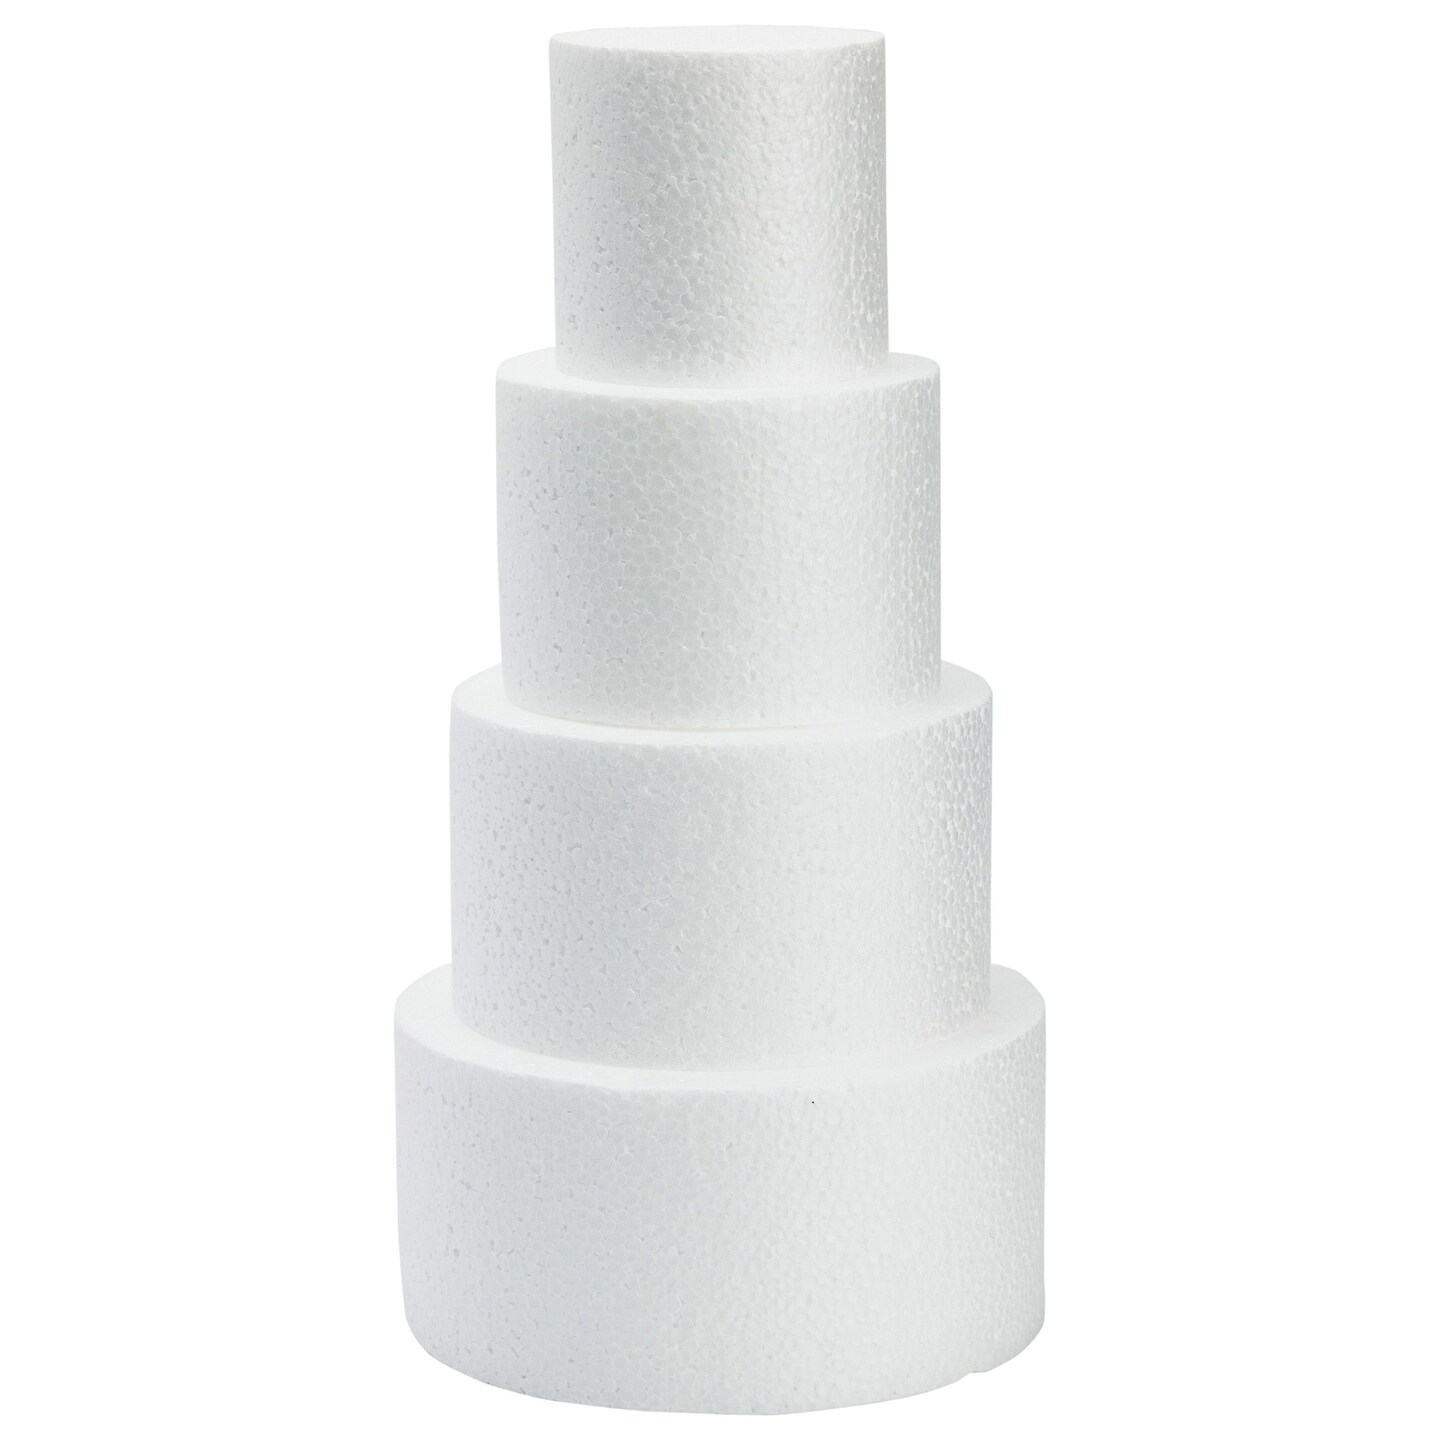 4 Piece Round Foam Cake Dummies for 12&#x22; Tall Fake Wedding Cake in 4 Sizes, for Decorating and Crafts (3, 4, 5, and 6 In)